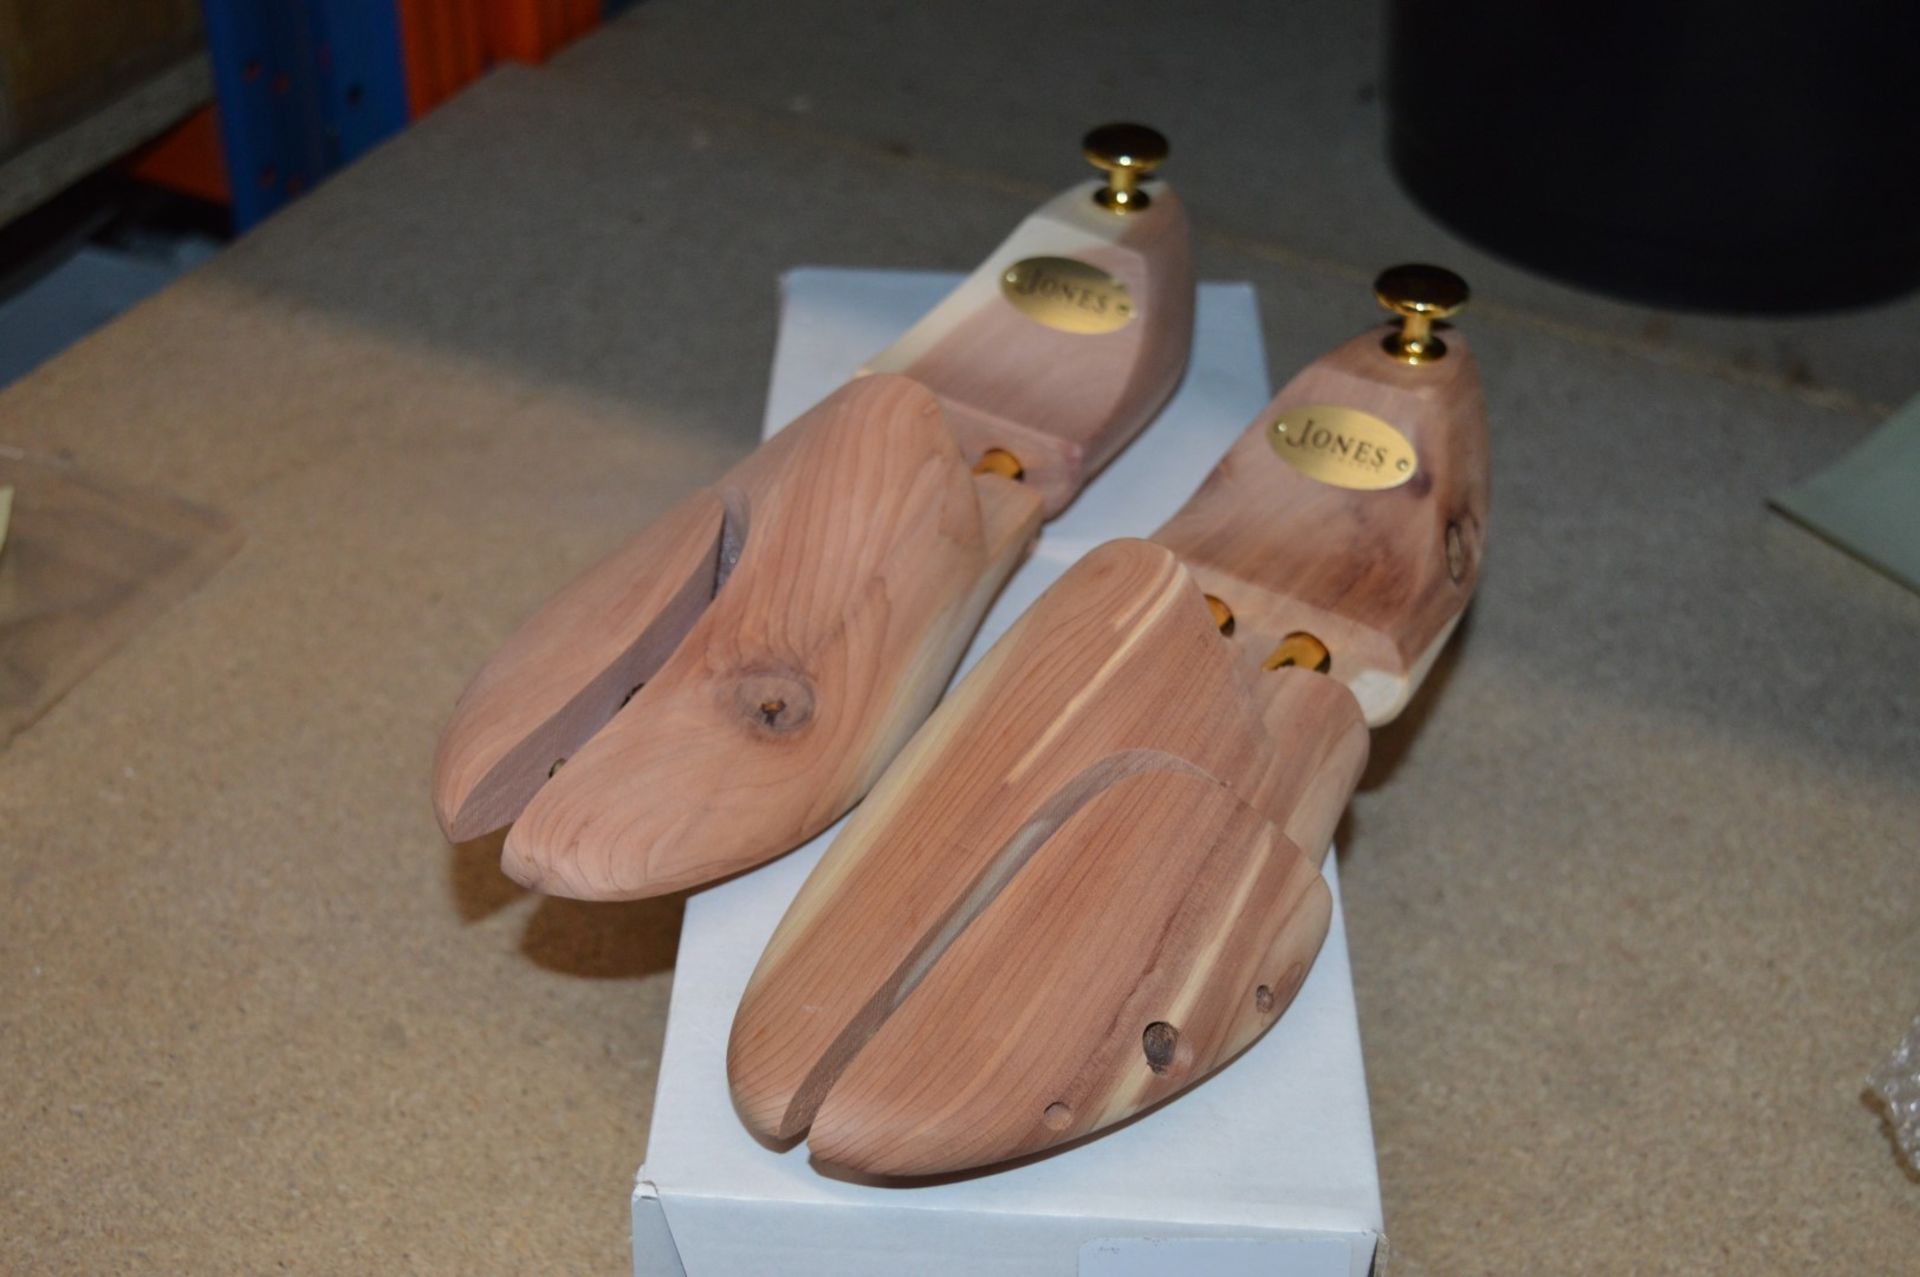 1 x Jones Bootmaker Albany Ladies Wooden Shoe Shaper - Size 7 - New and Boxed - CL285 - Ref - Image 2 of 4